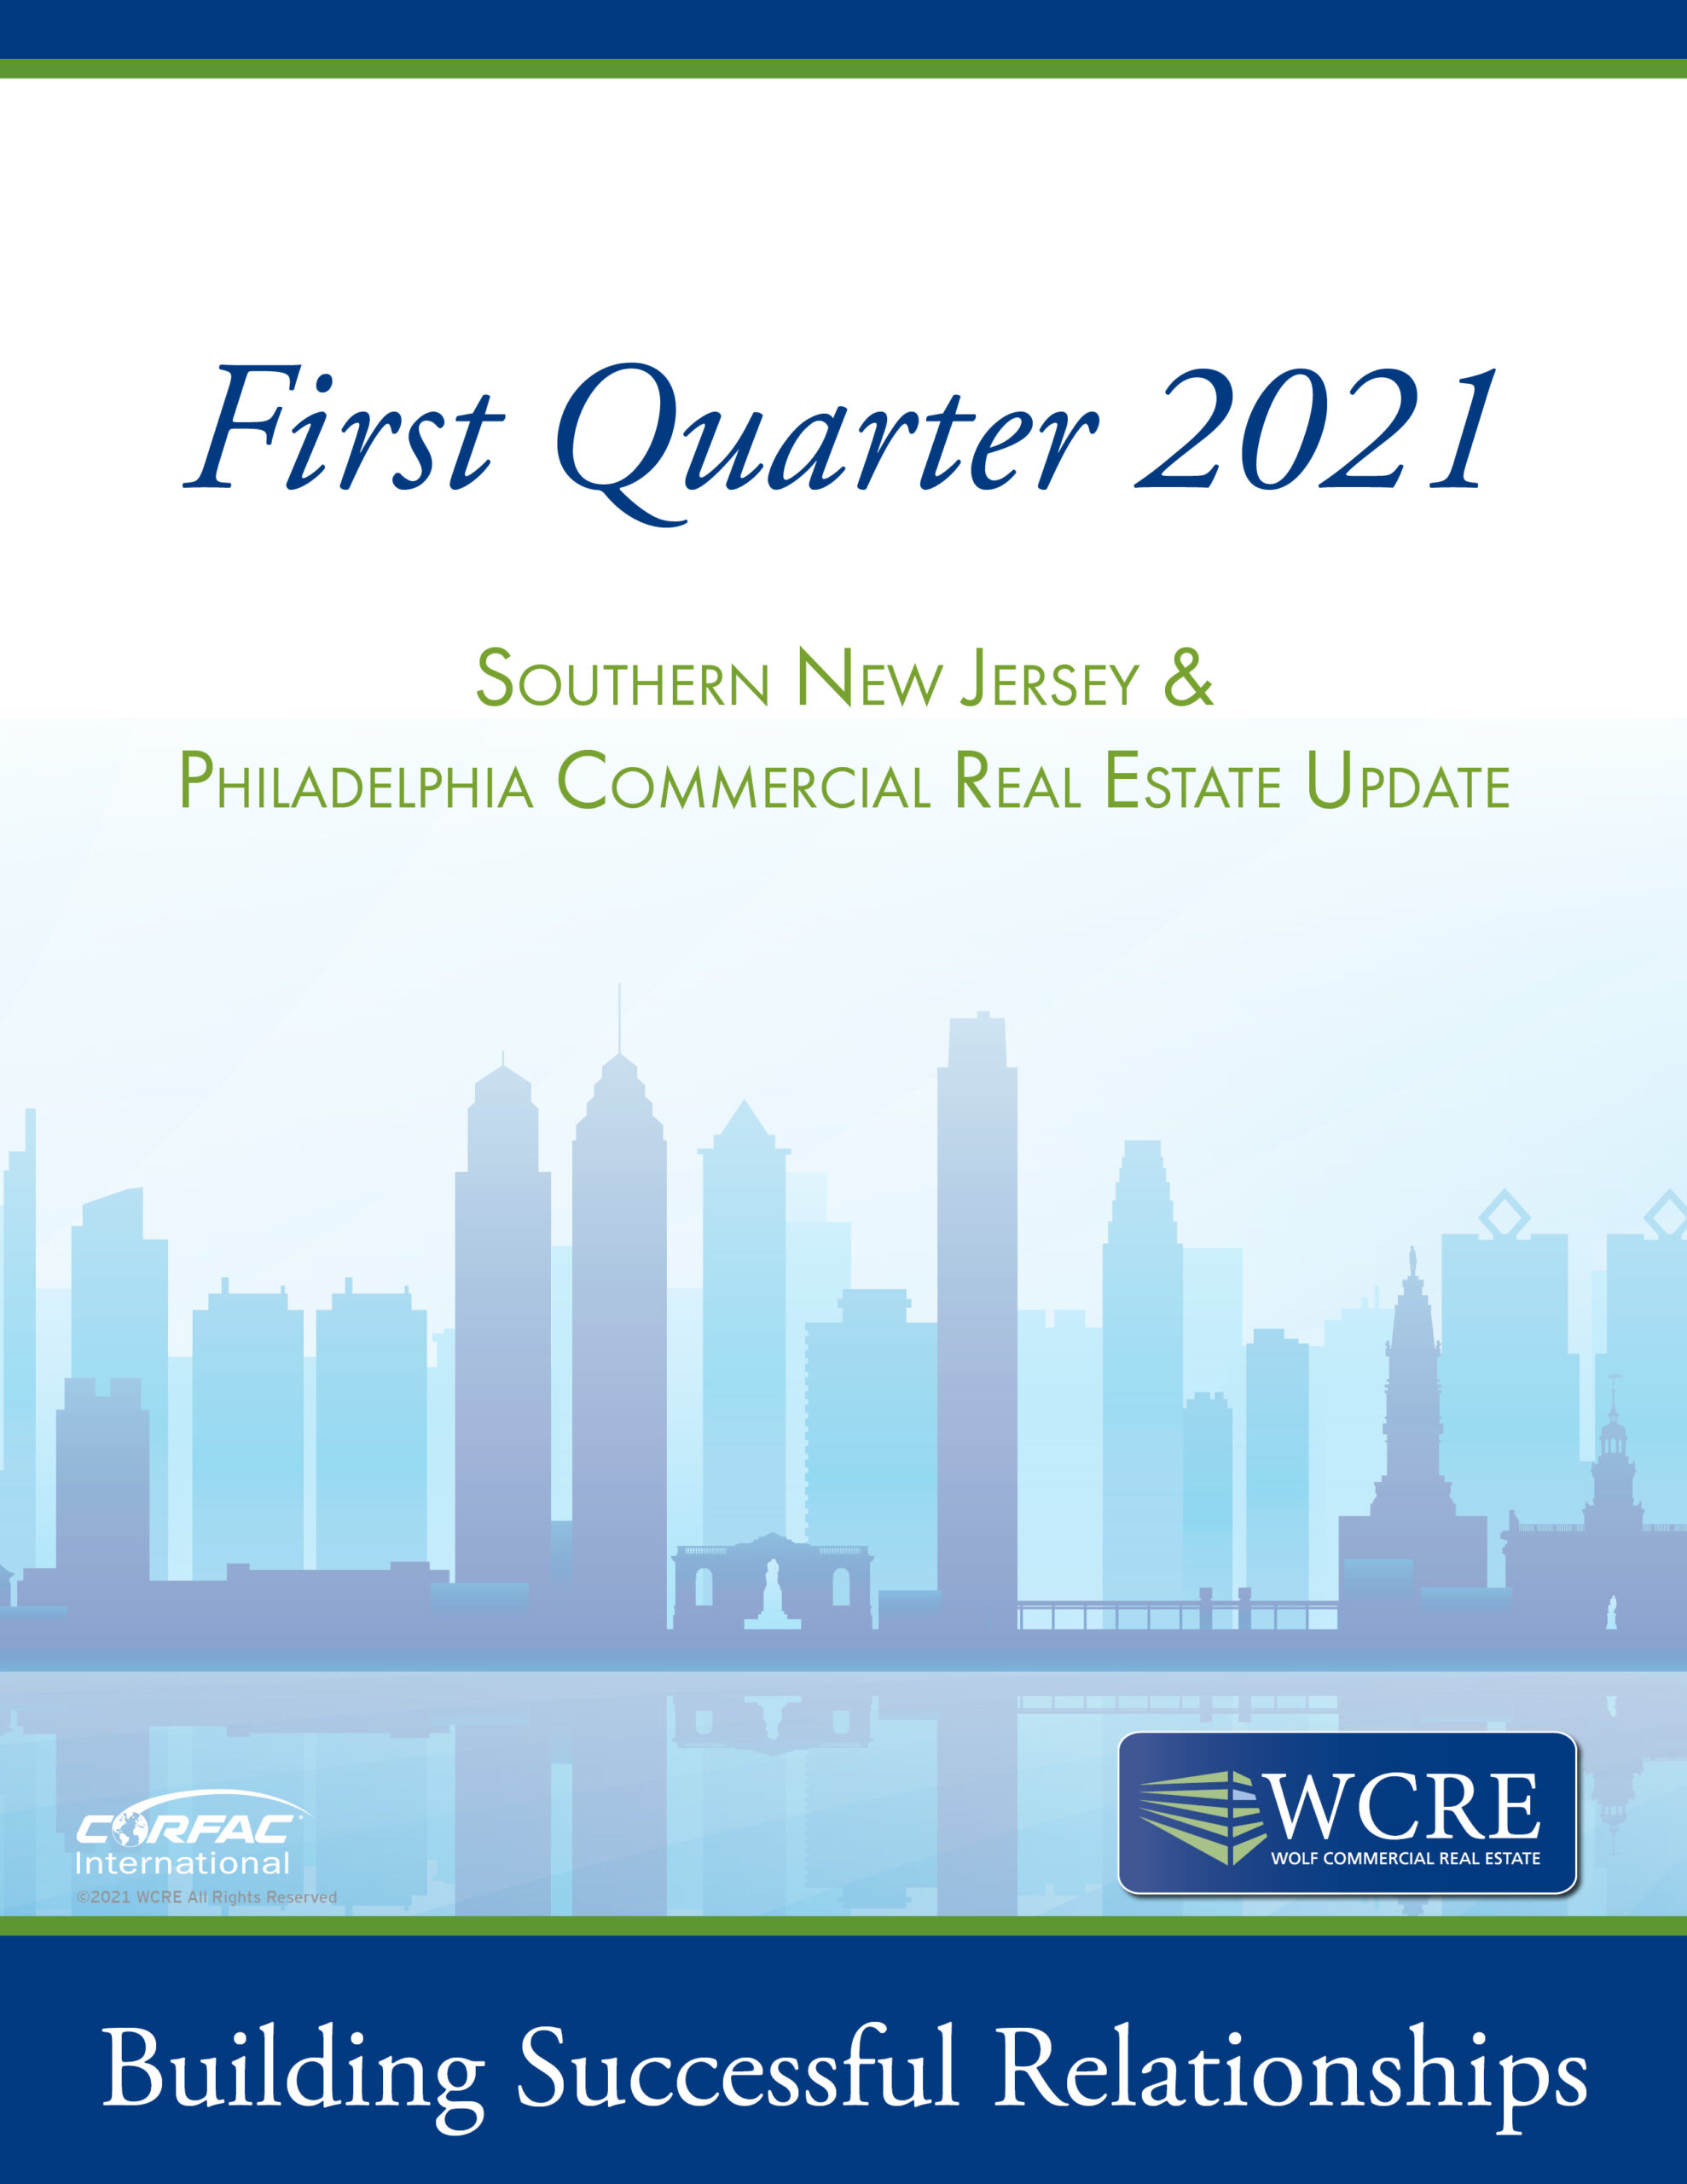 WCRE FIRST QUARTER 2021 REPORT